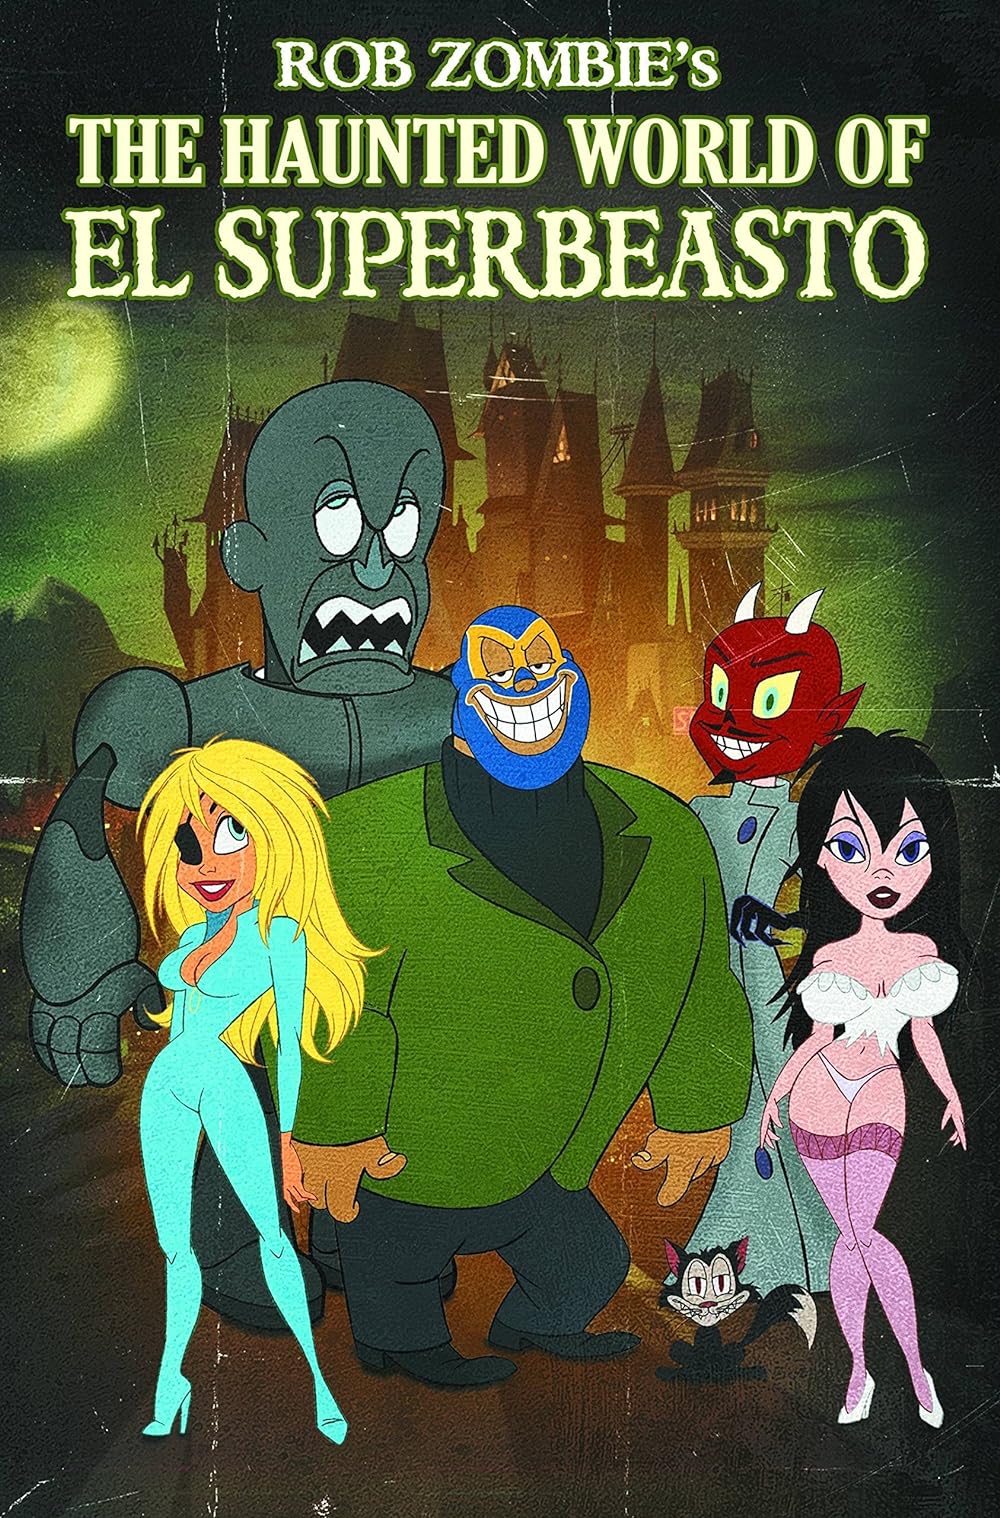 alex coope recommends The Haunted World Of El Superbeasto Nude